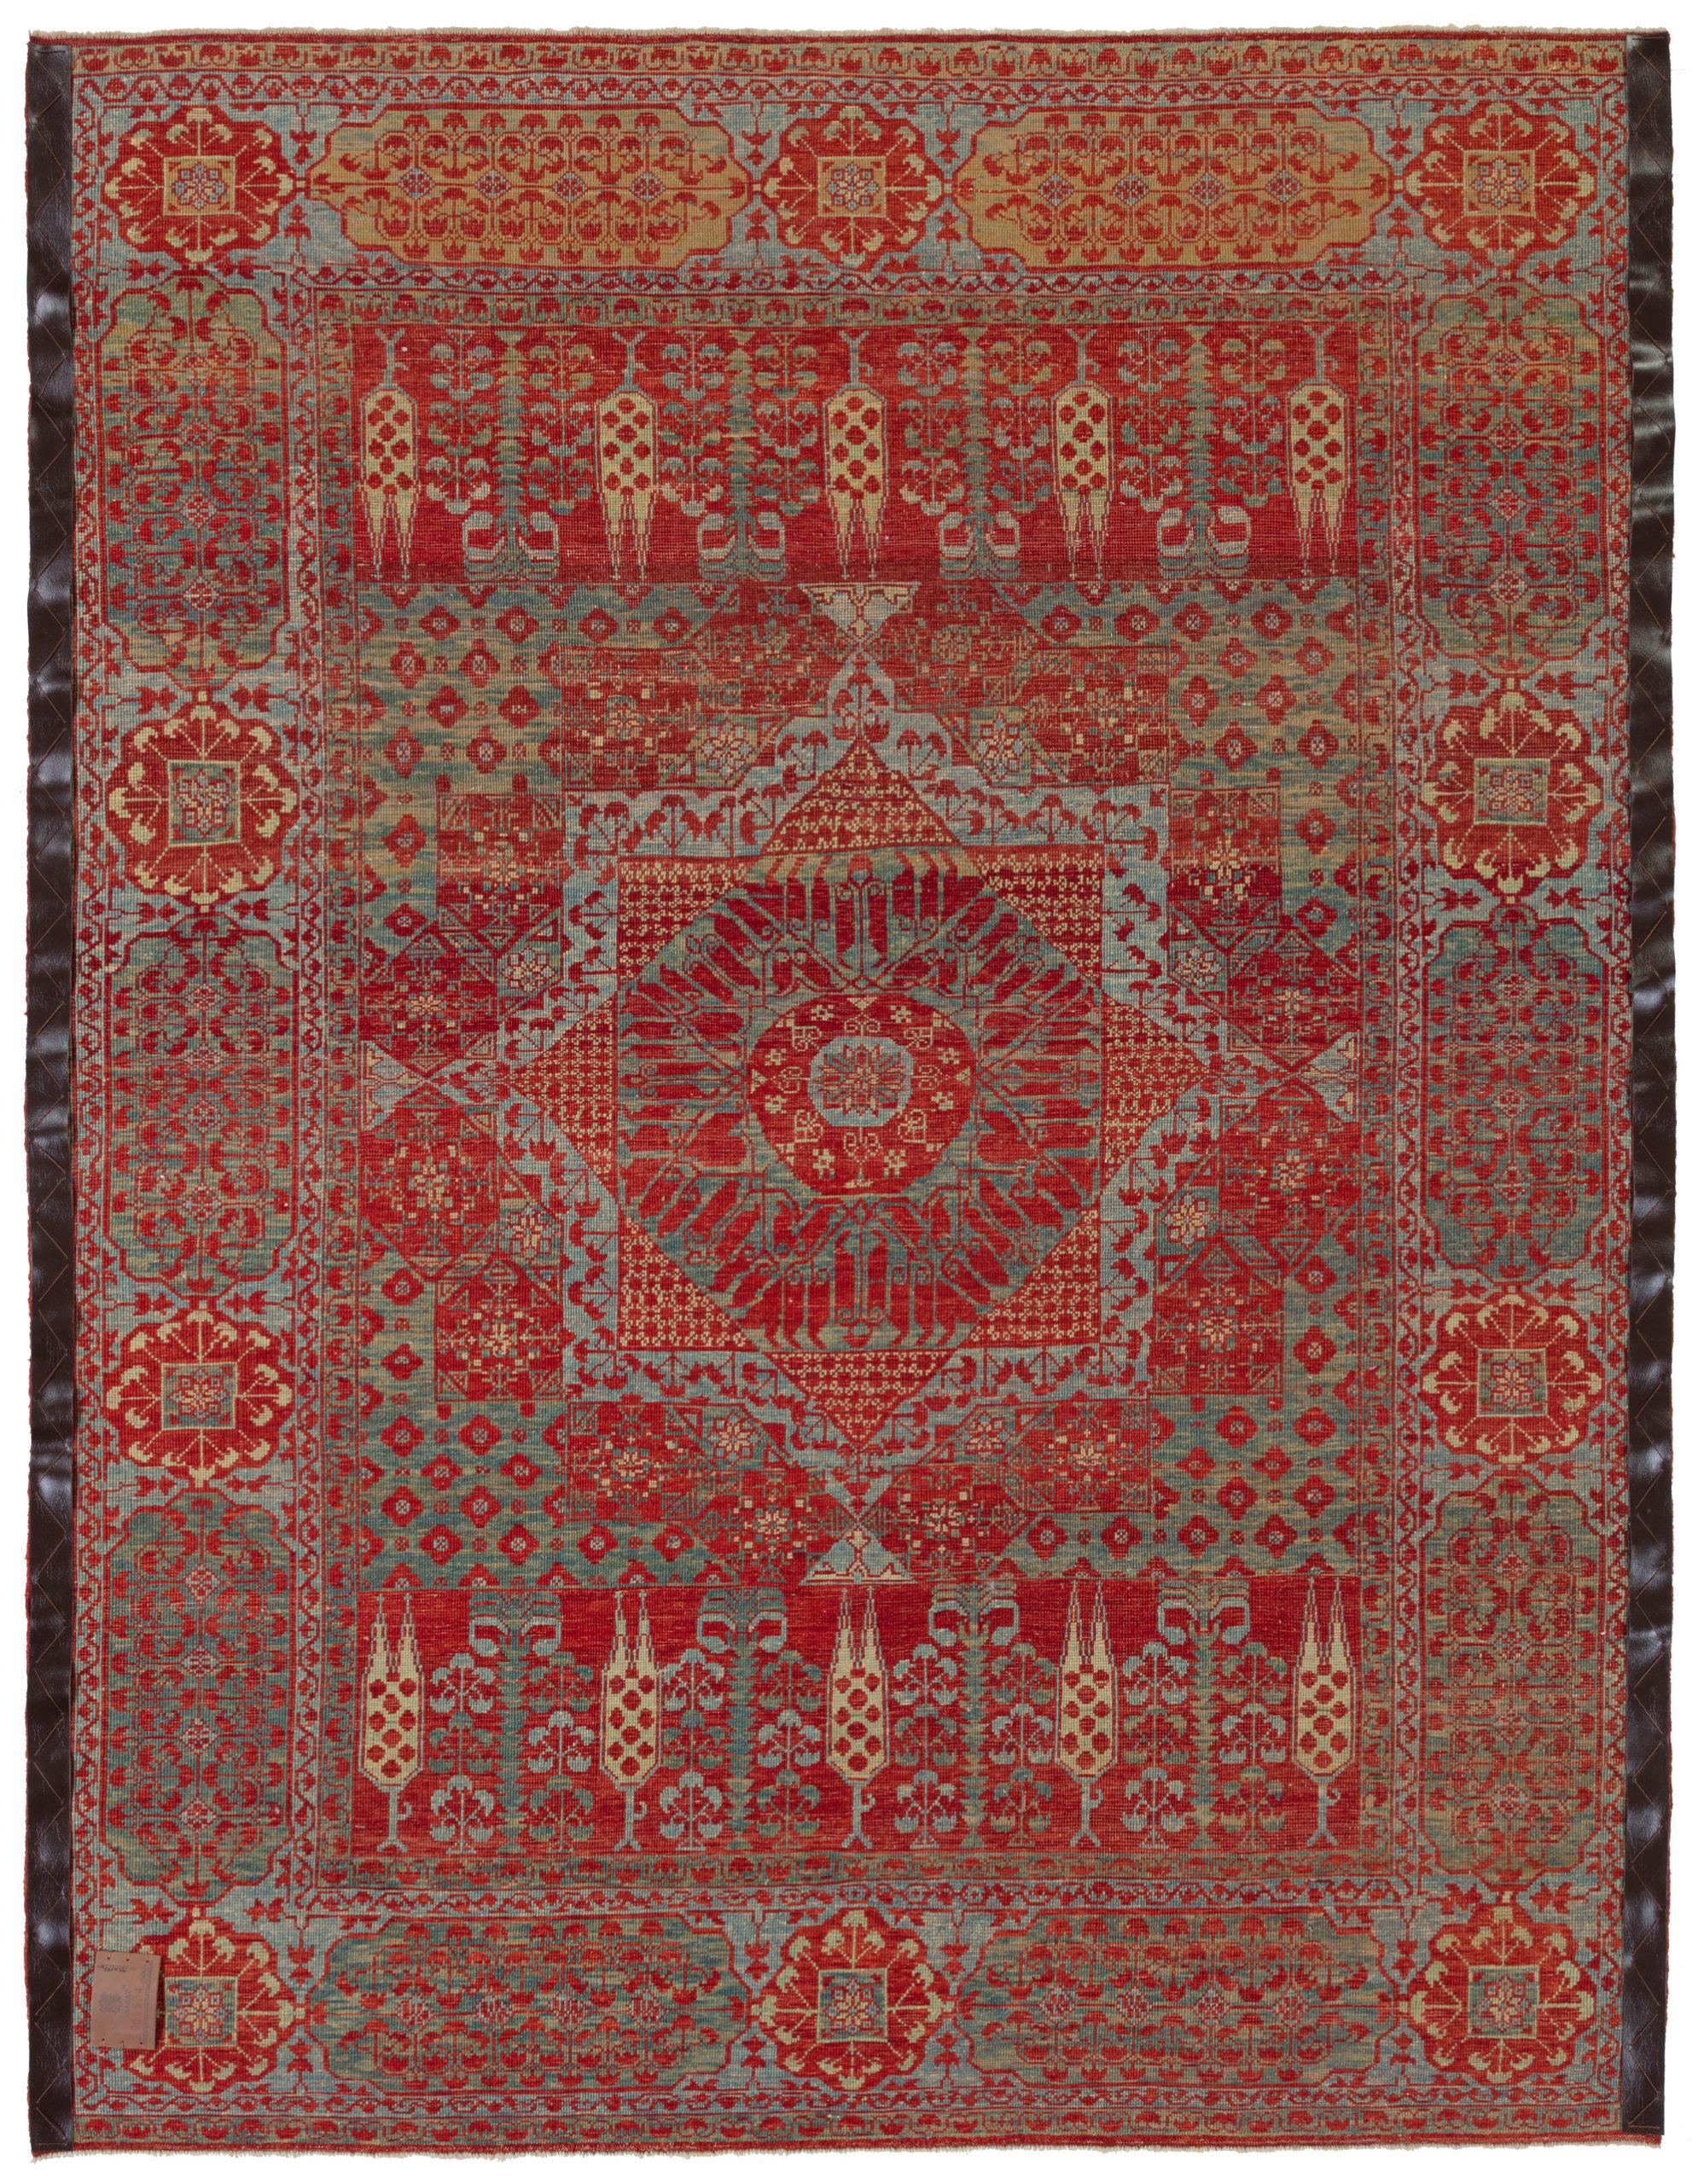 The design source of the rug comes from the book Renaissance of Islam, Art of the Mamluks, Esin Atil, Smithsonian Institution Press, Washington D.C., 1981 nr.126. This rug with palm trees and cypresses was designed in the late 15th-century rug by